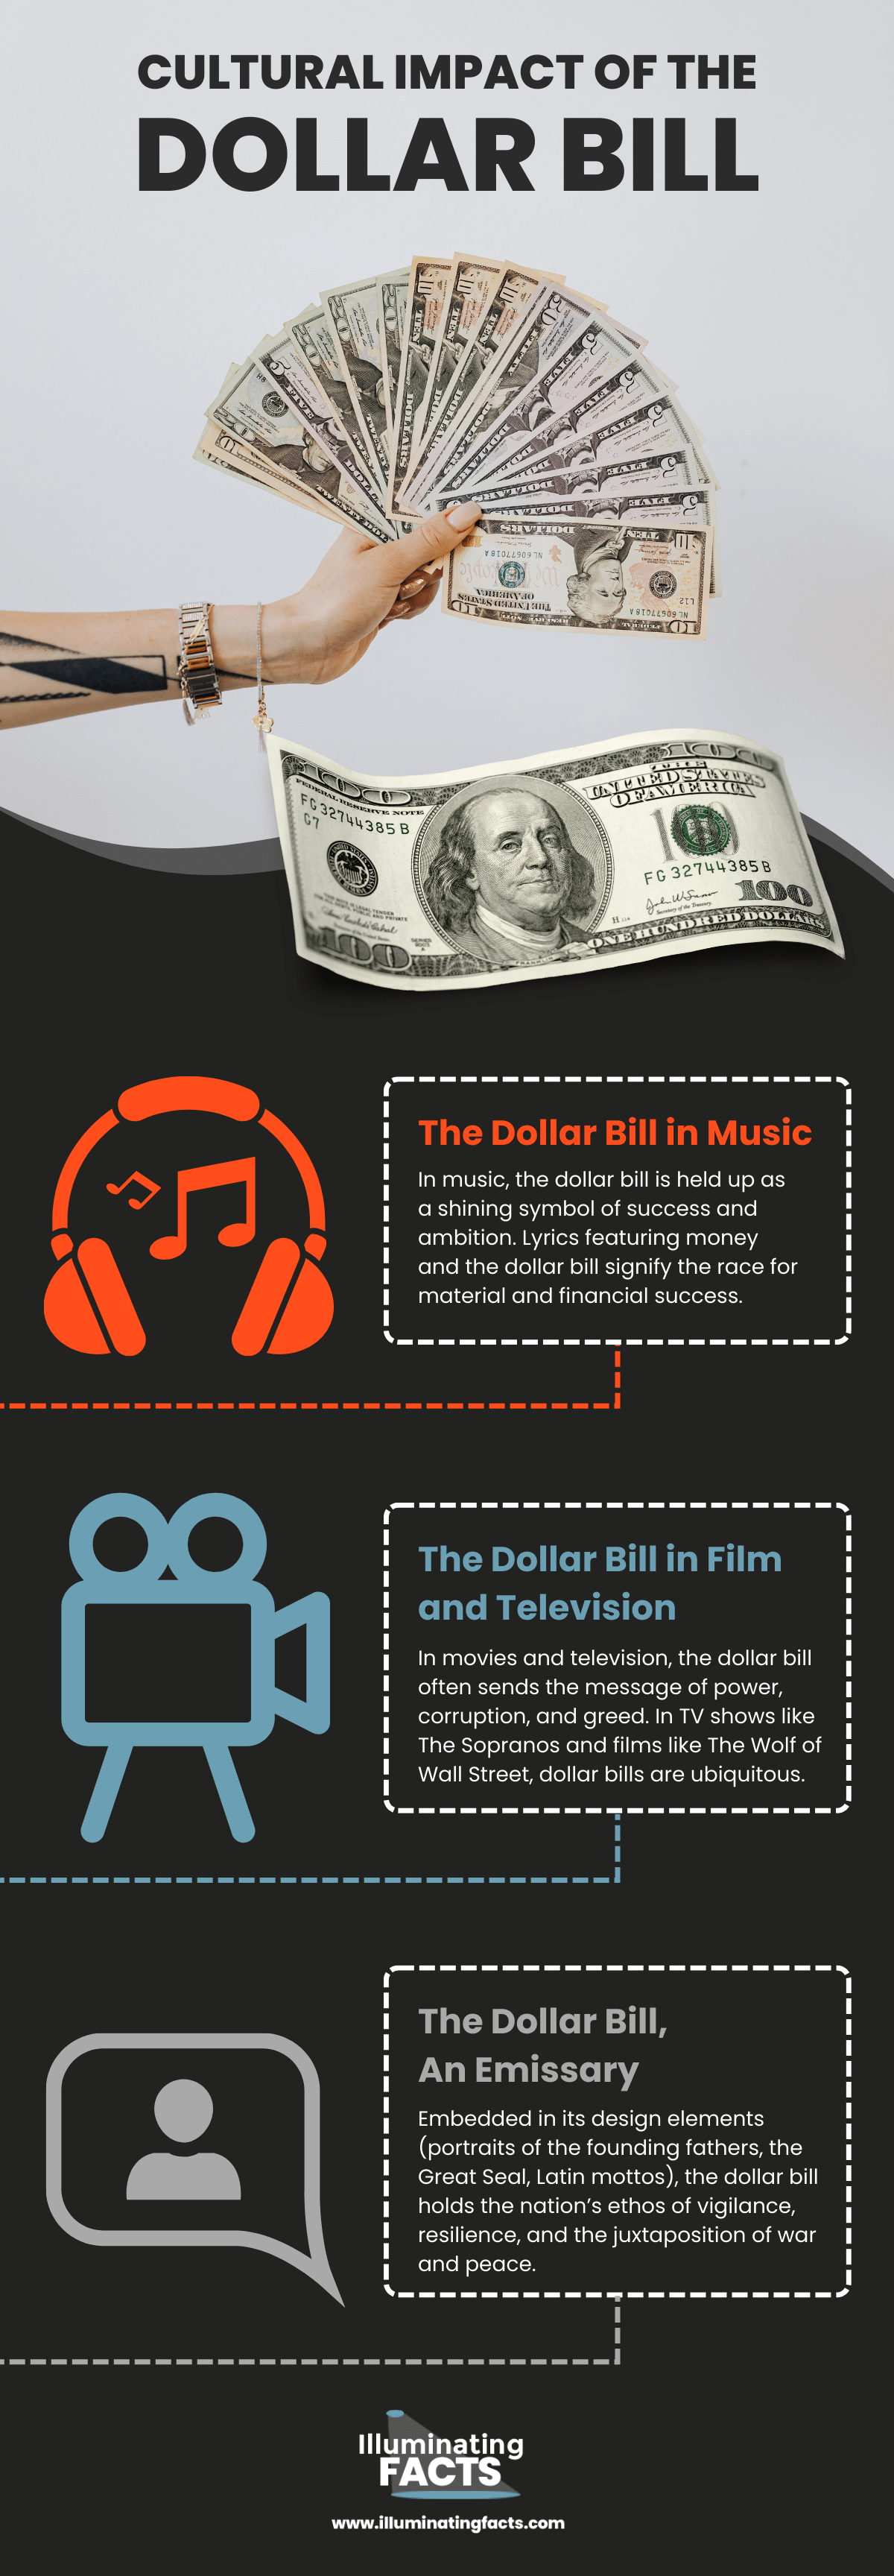 Cultural Impact of the Dollar Bill